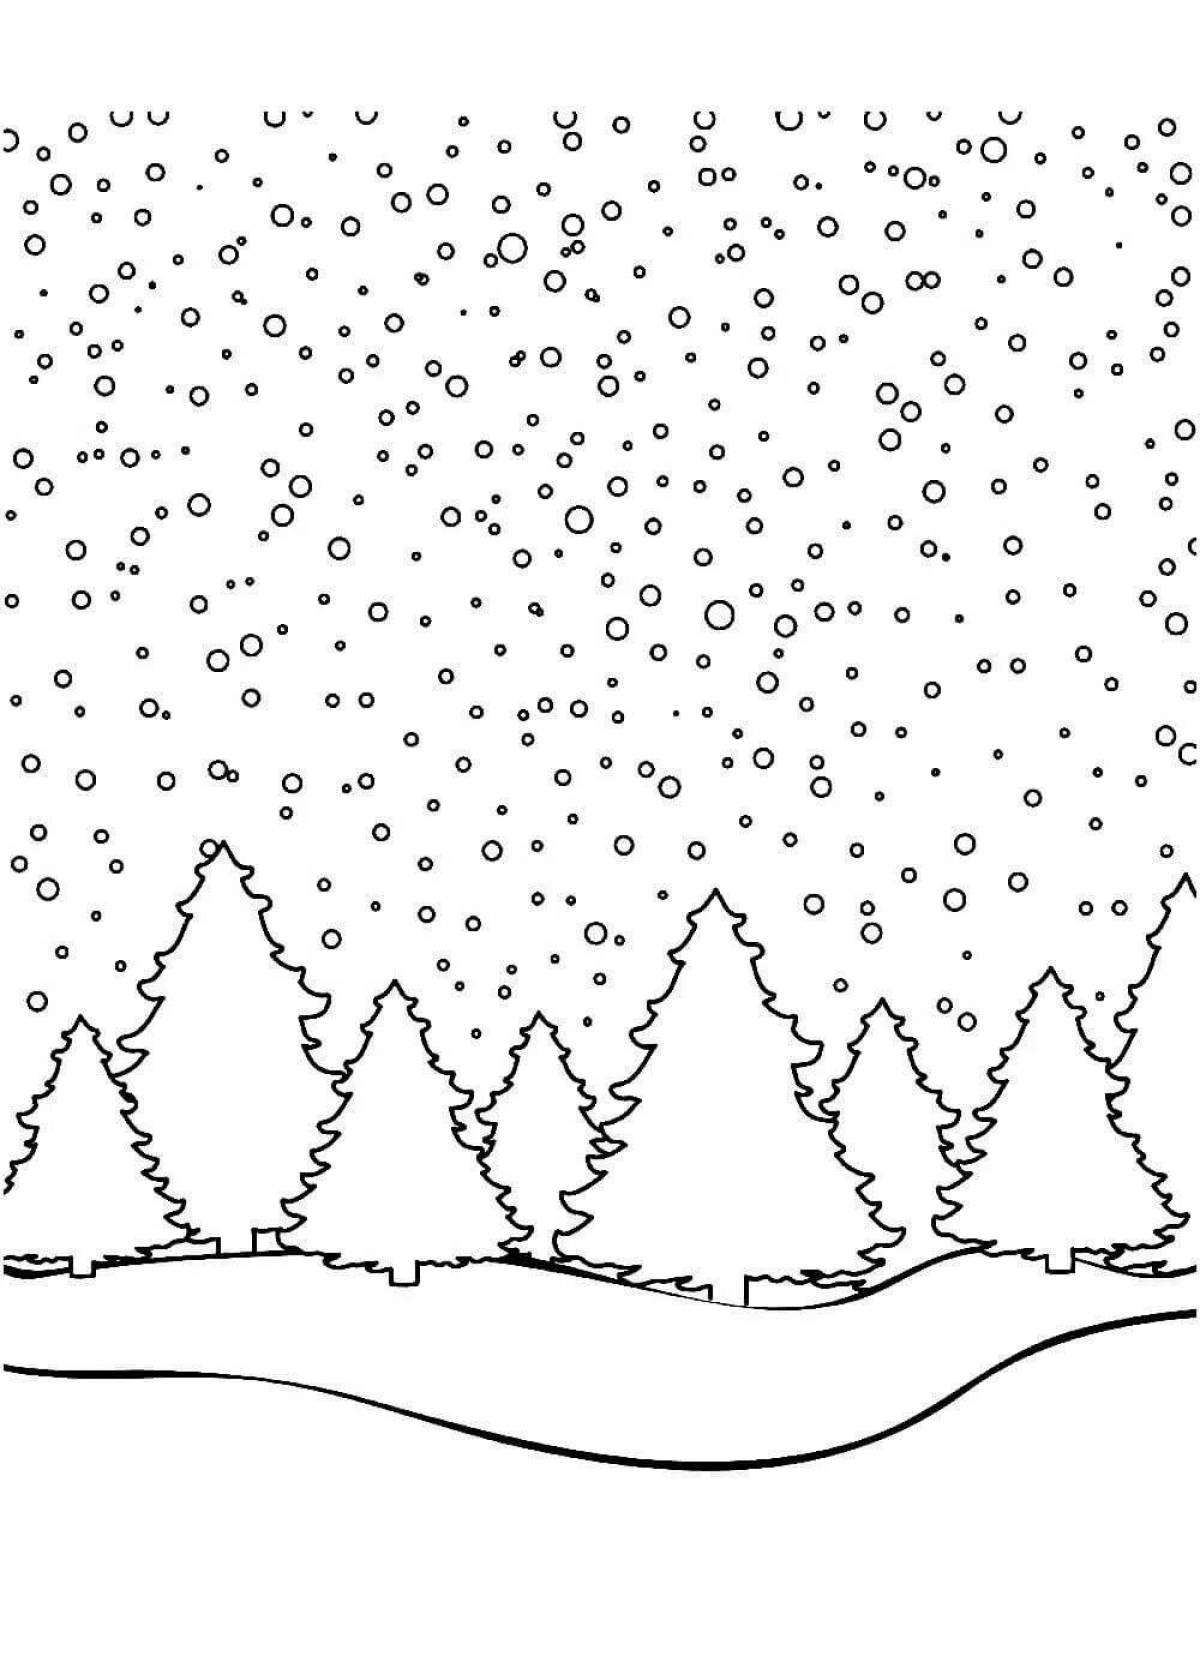 Snowing bright coloring book for kids